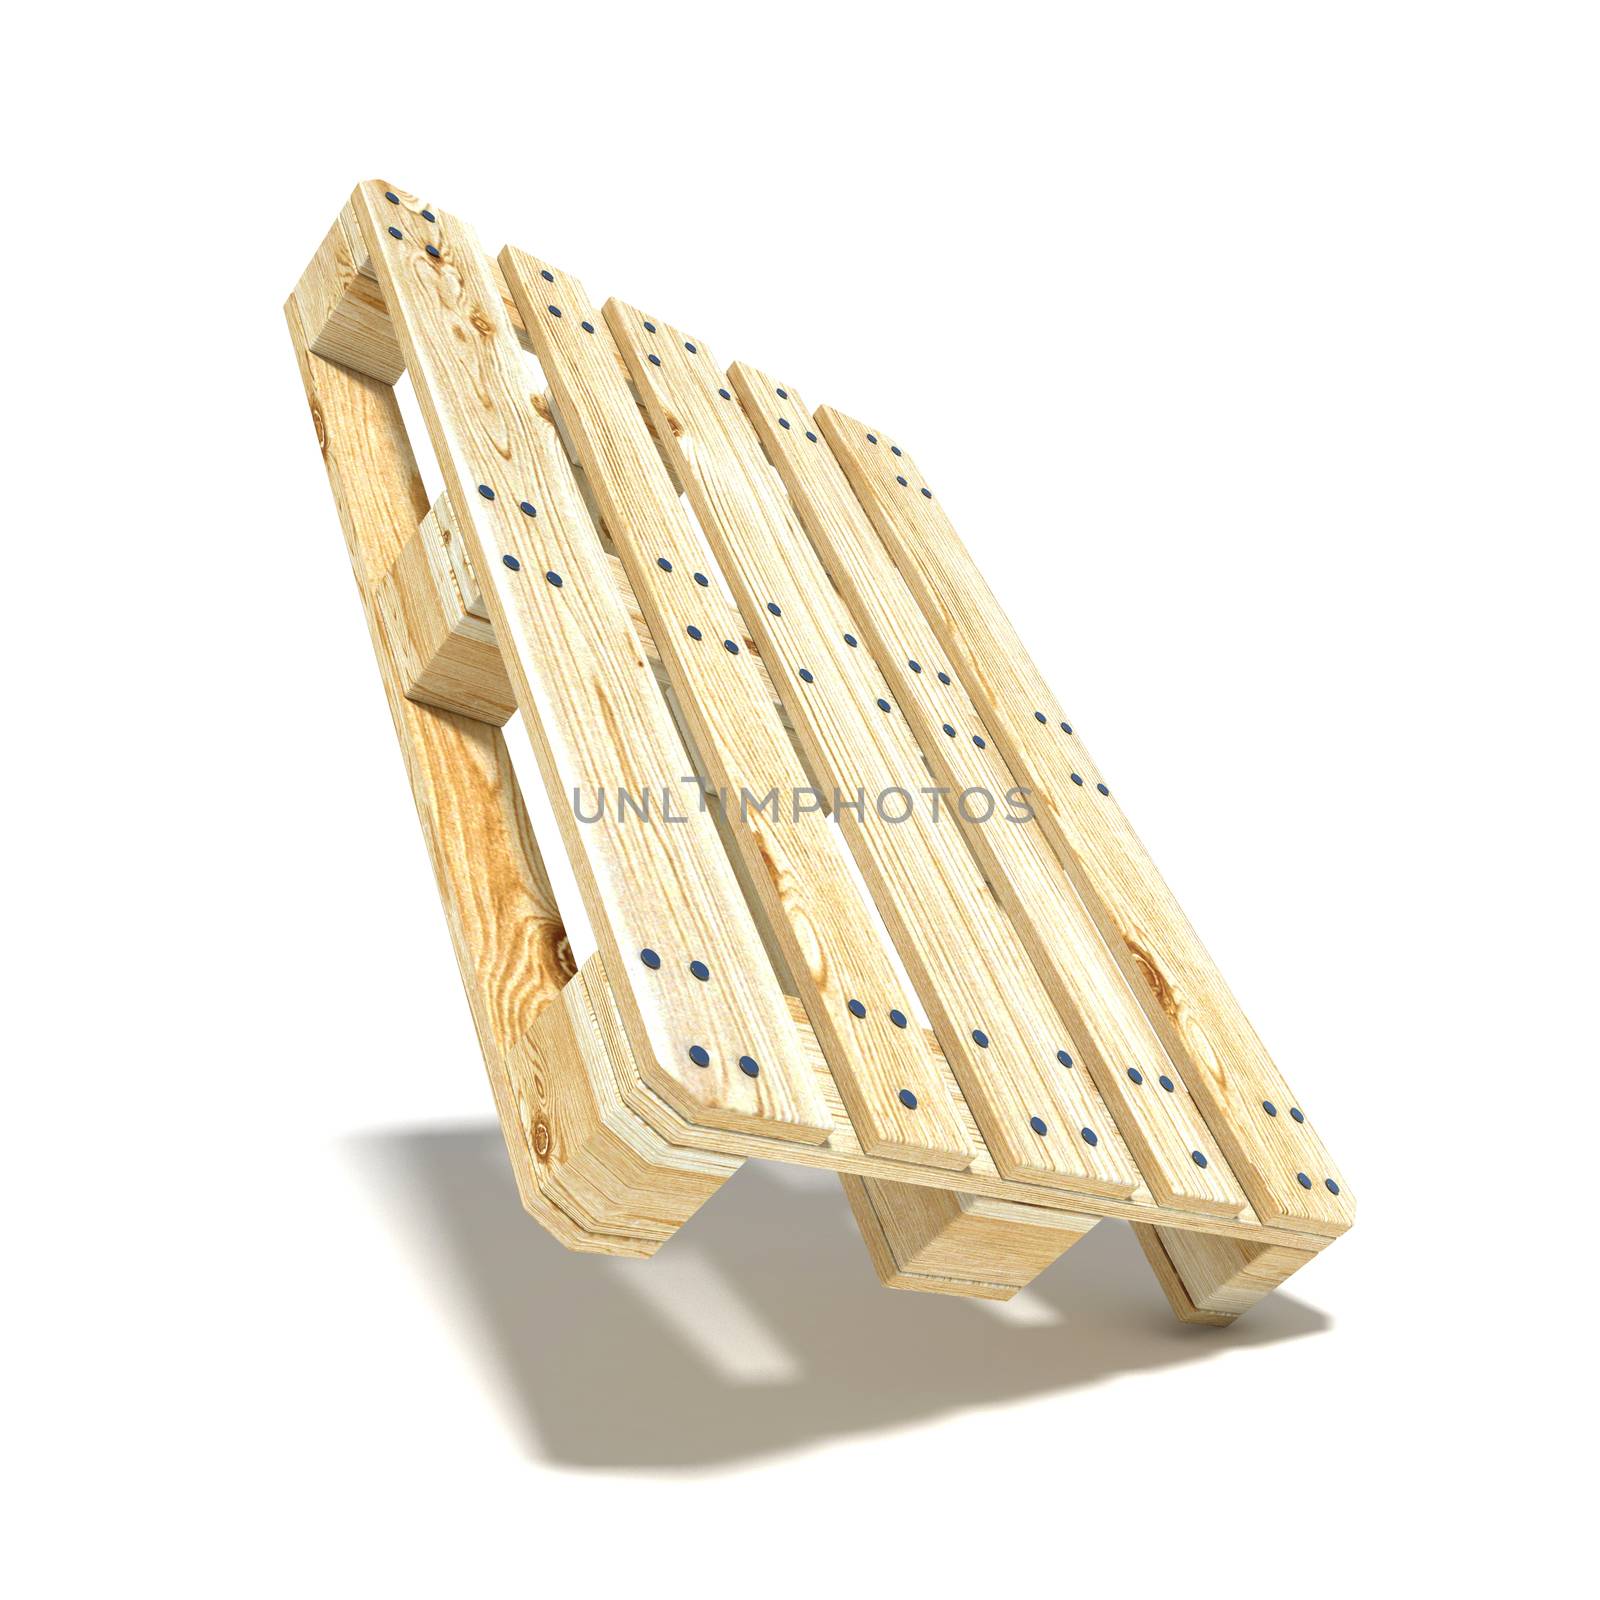 Euro pallet. Angled view. 3D by djmilic